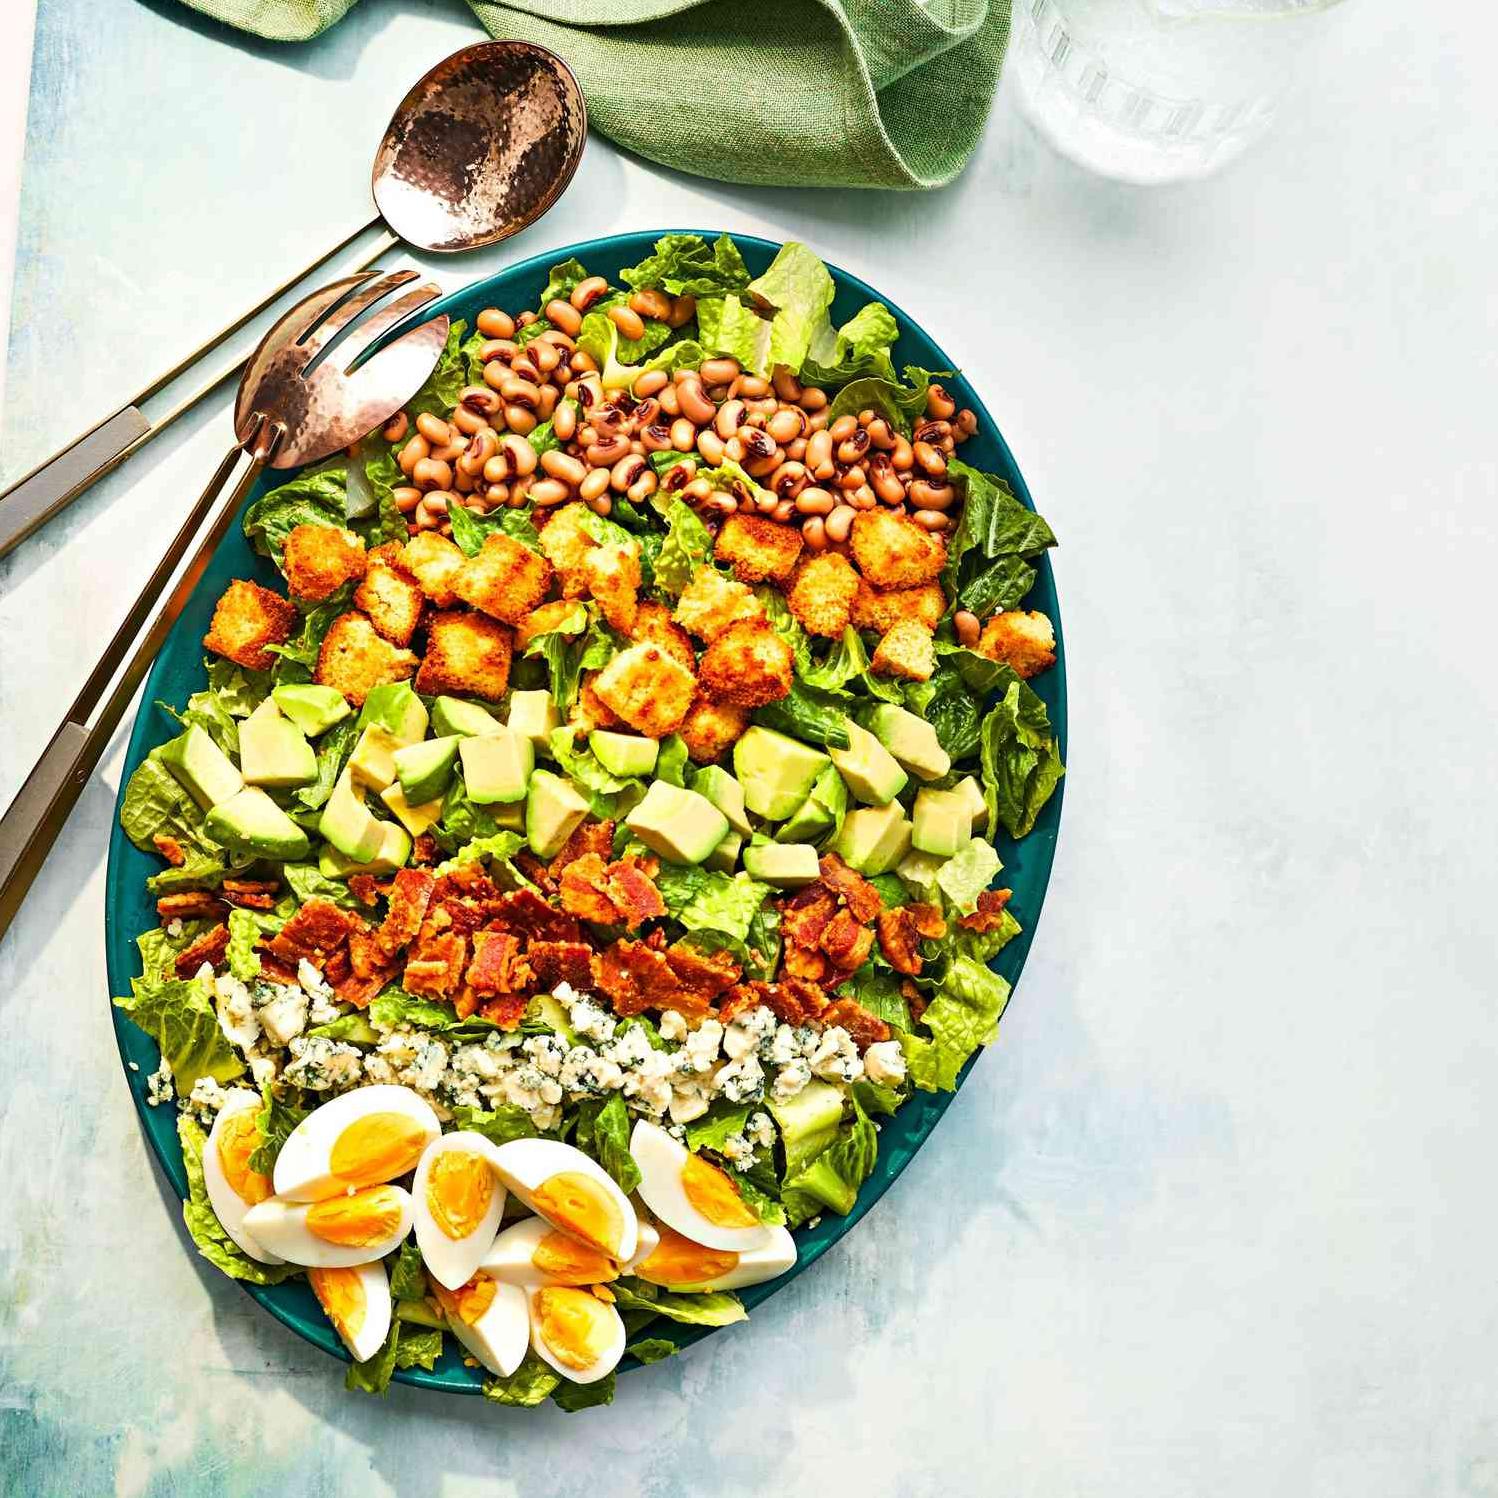  This Southern-Style Cobb Salad is a colorful masterpiece of flavors!